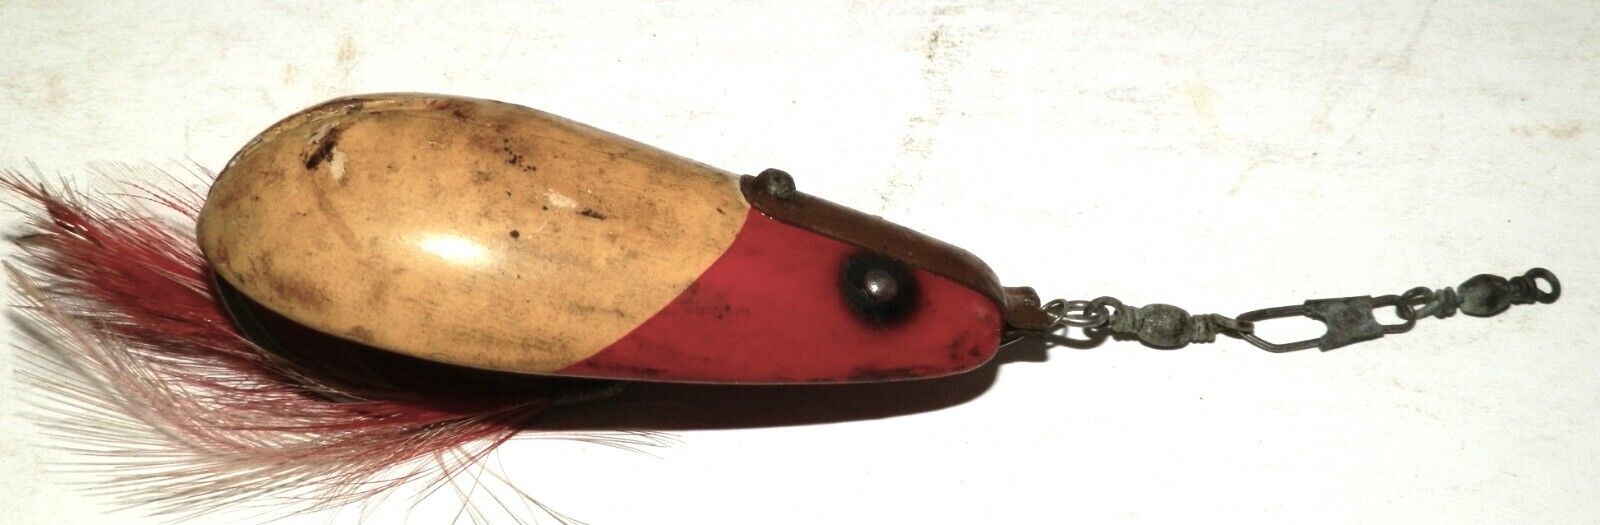 Vintage Sales results No. 1 Wooden Fishing Lure Lauby Weedless Trailer Award-winning store 2.5